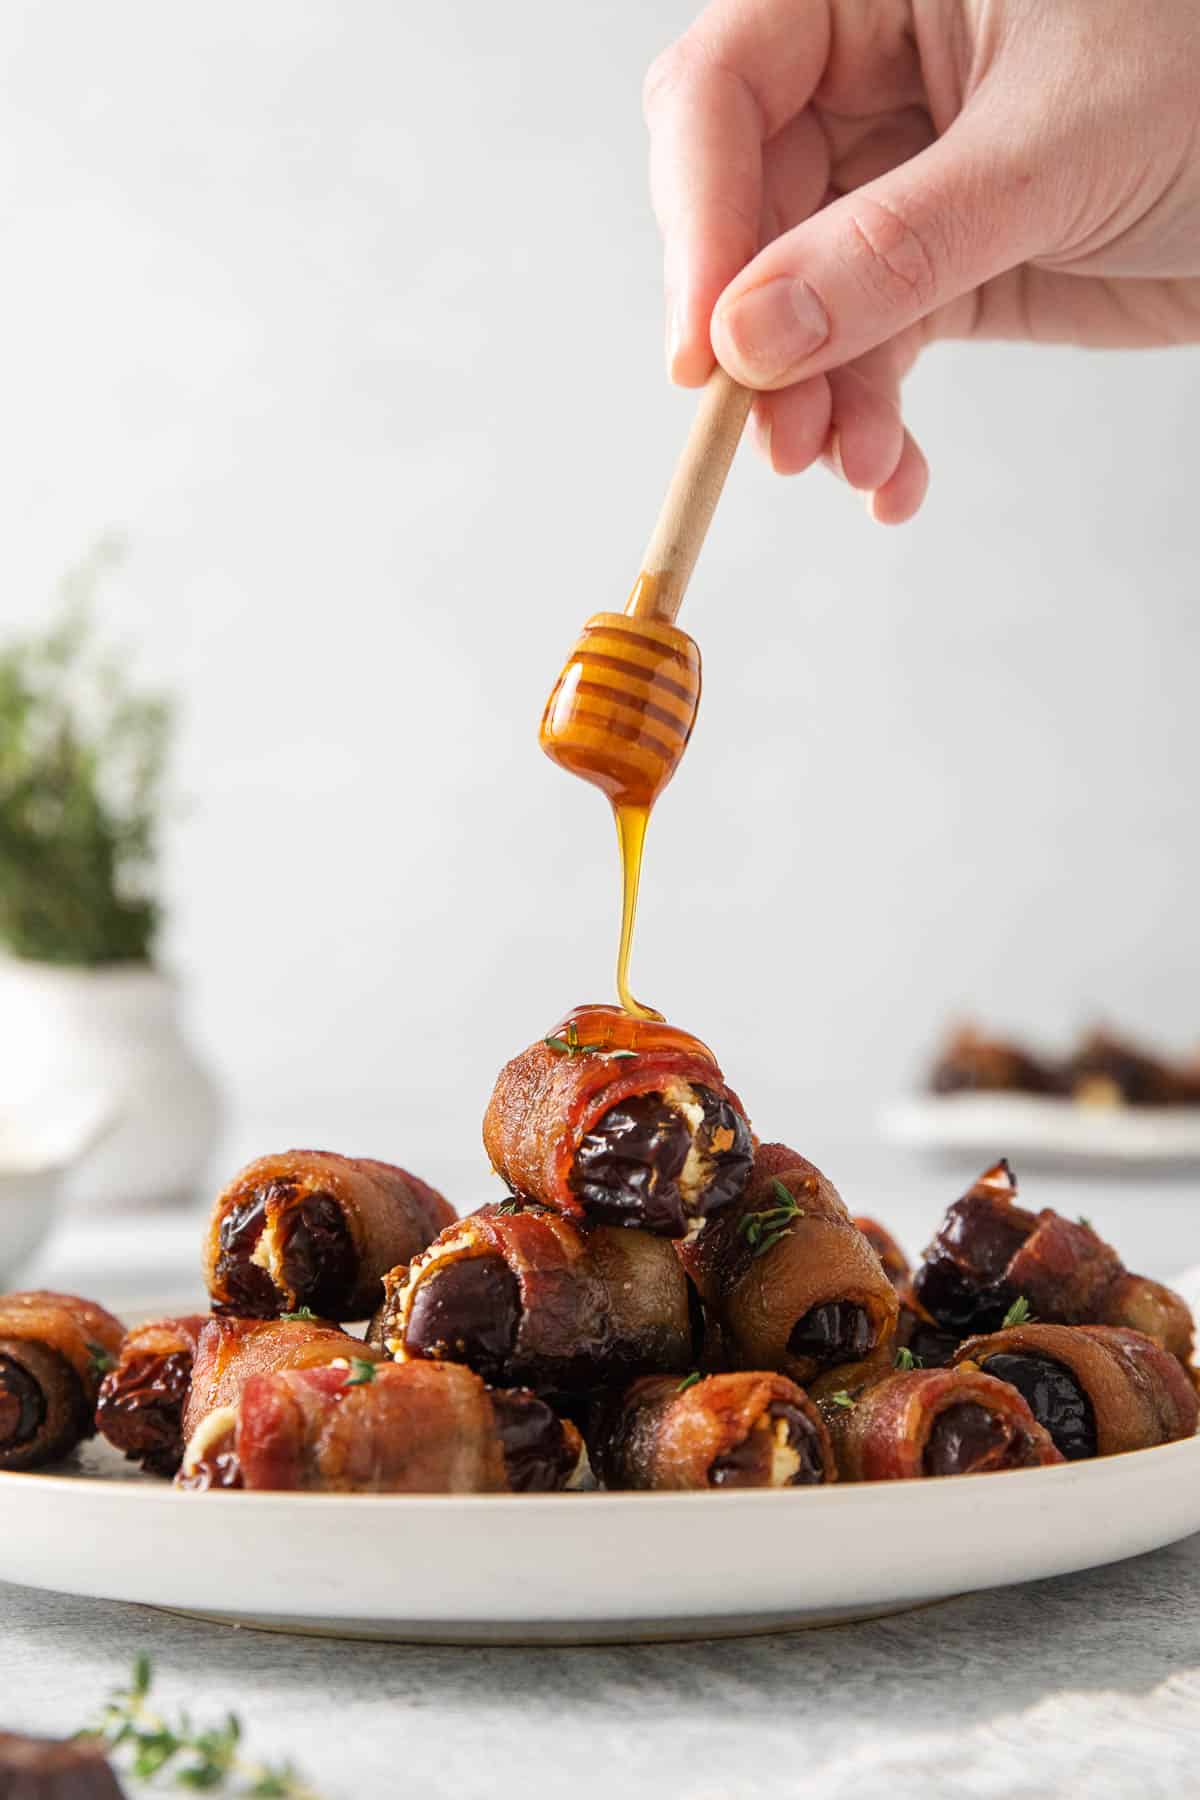 Bacon-wrapped dates on a plate, and a hand drizzling honey over them